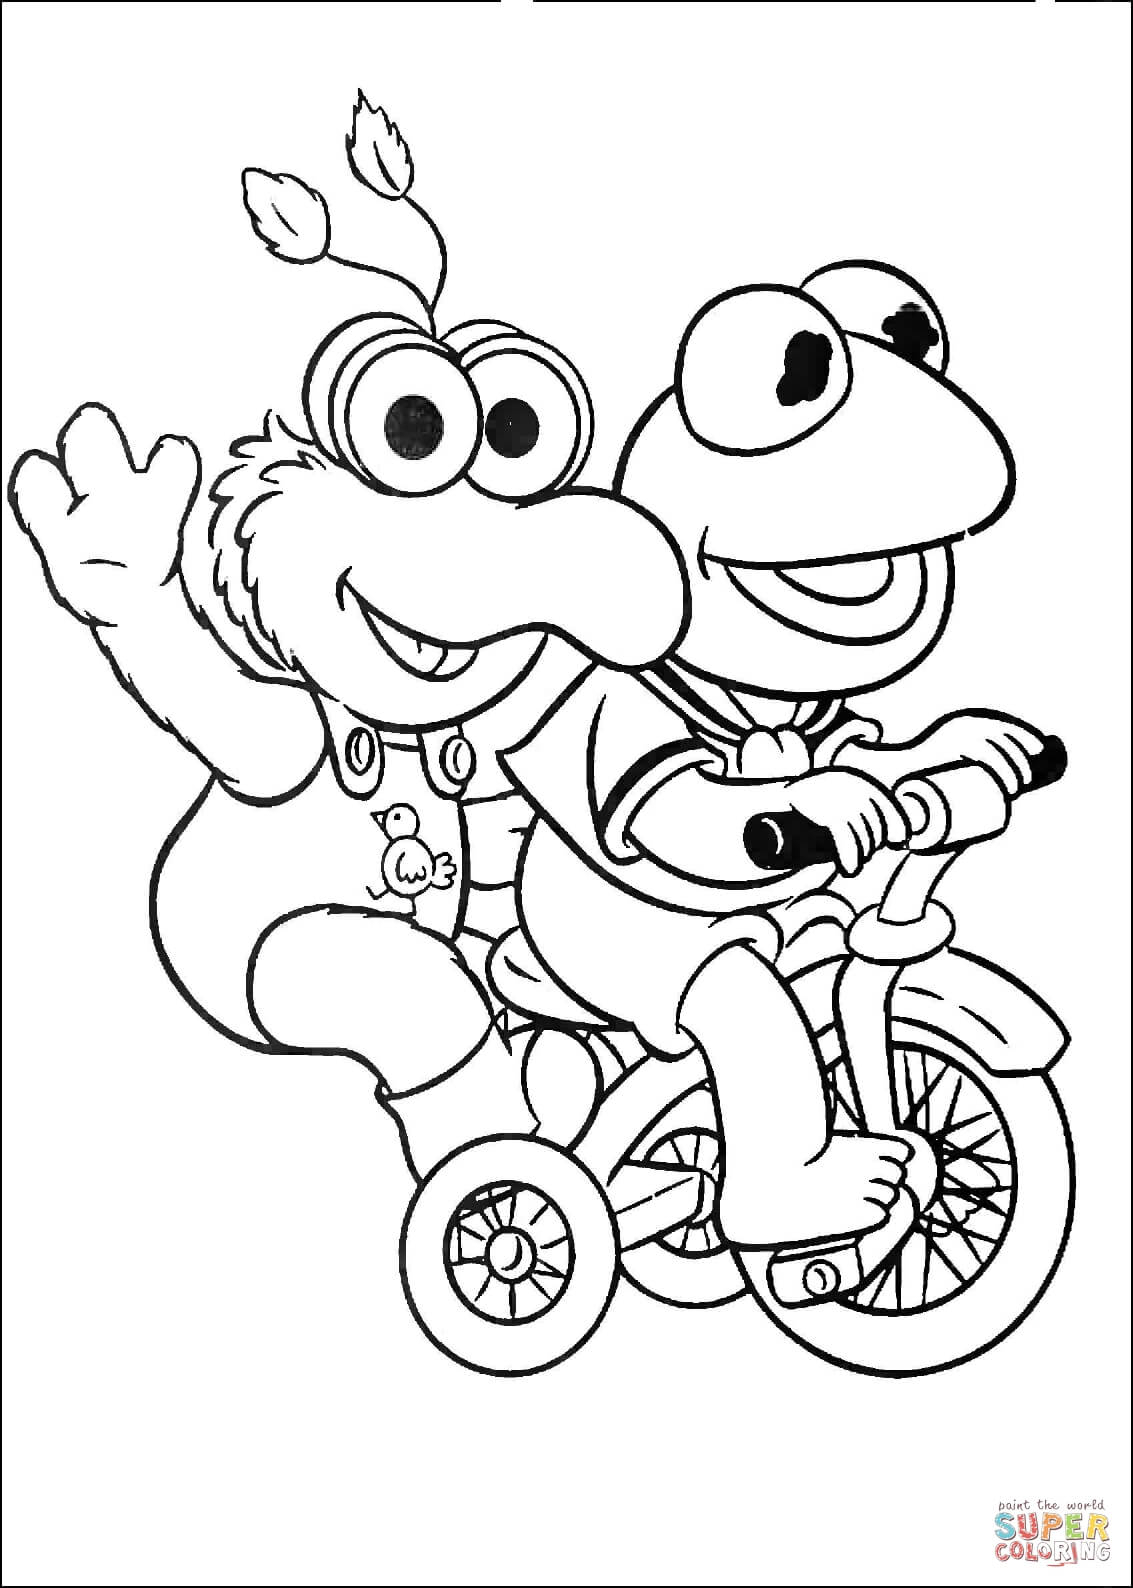 Coloring Pages Of Baby Elmo Georgia O Keeffe Coloring Pages